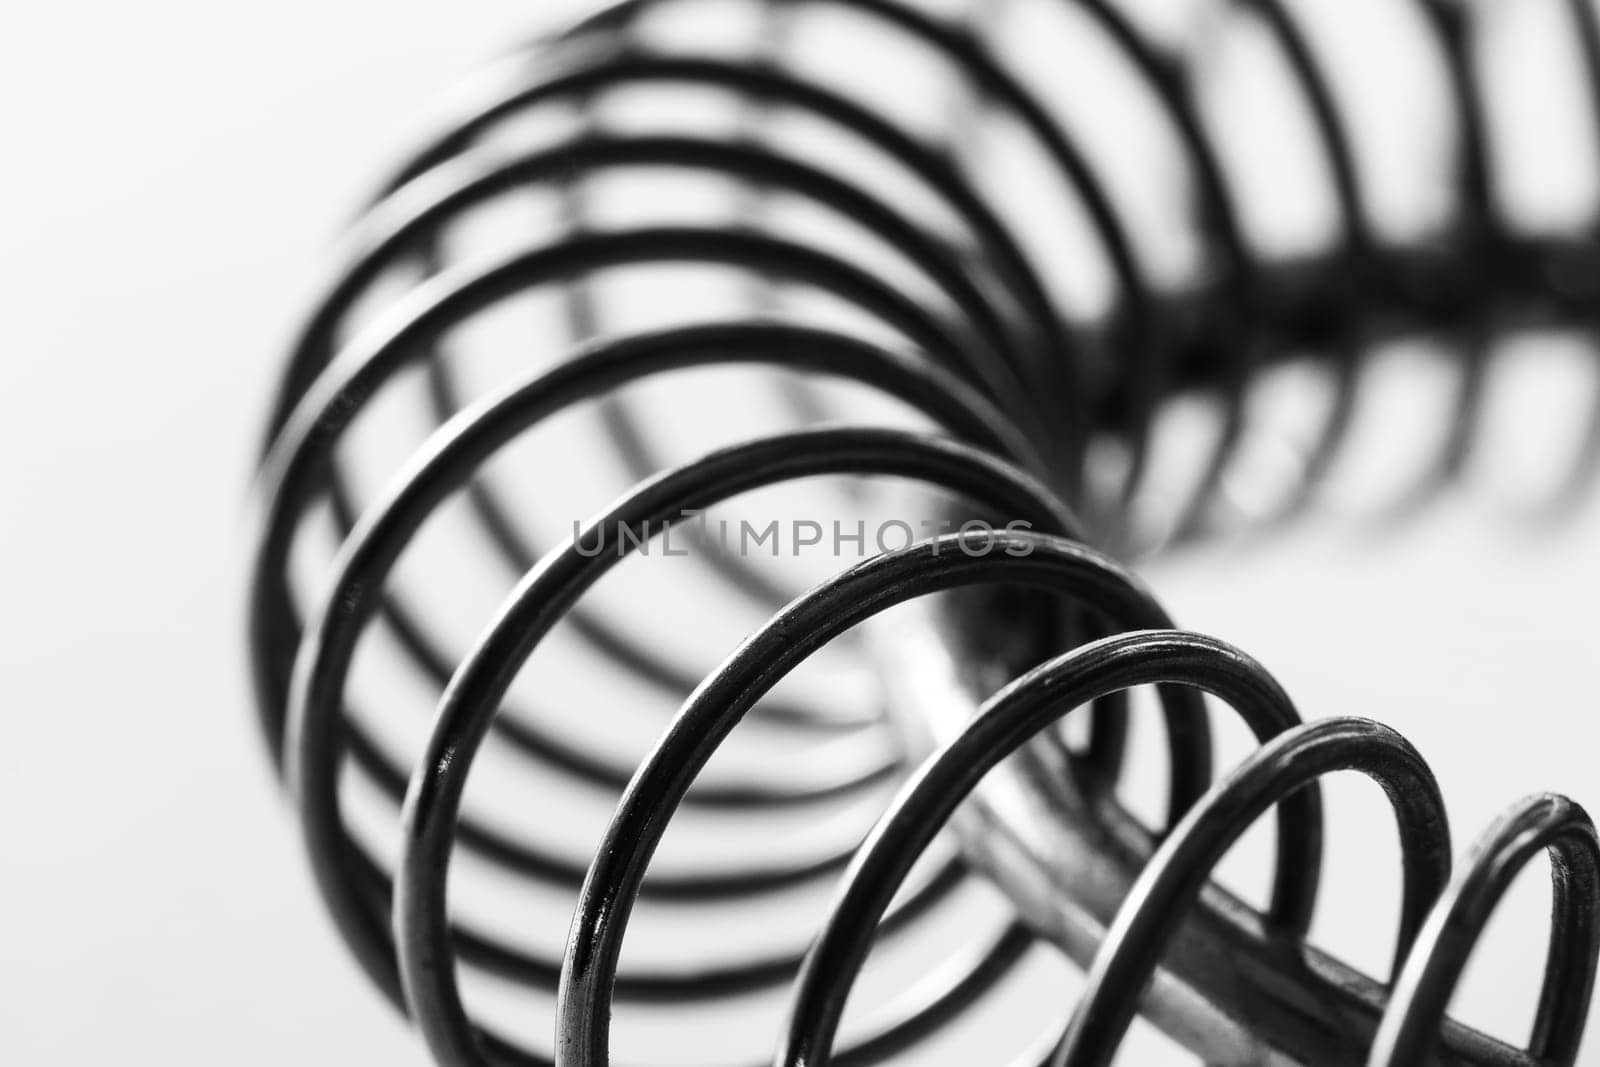 Metal spring coiled, black and white macro shot, soft focus, abstract industrial art